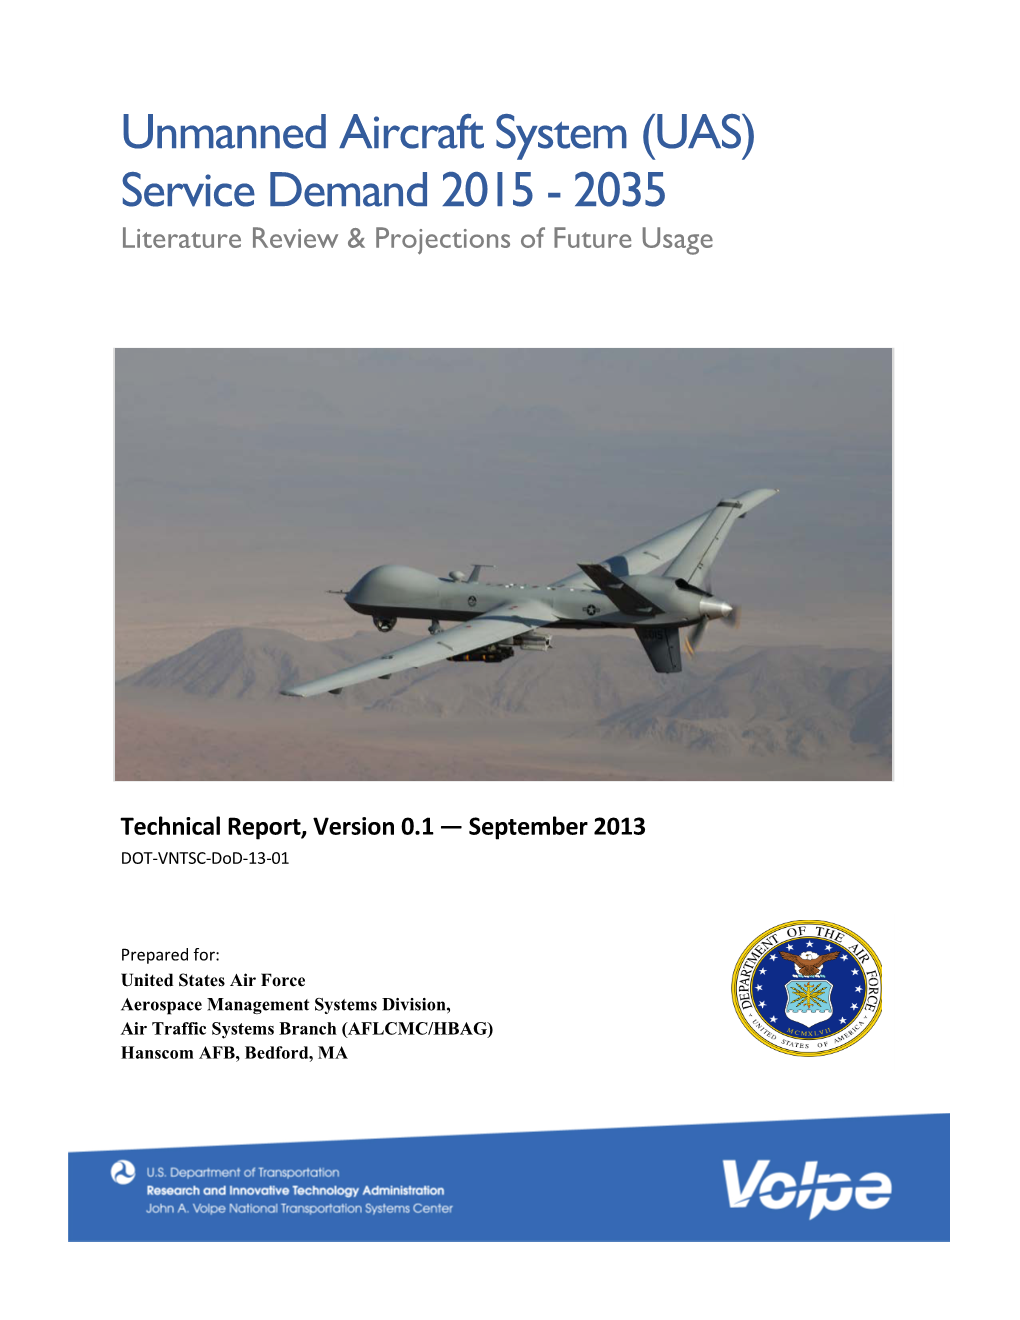 Unmanned Aircraft System (UAS) Service Demand 2015 - 2035 Literature Review & Projections of Future Usage